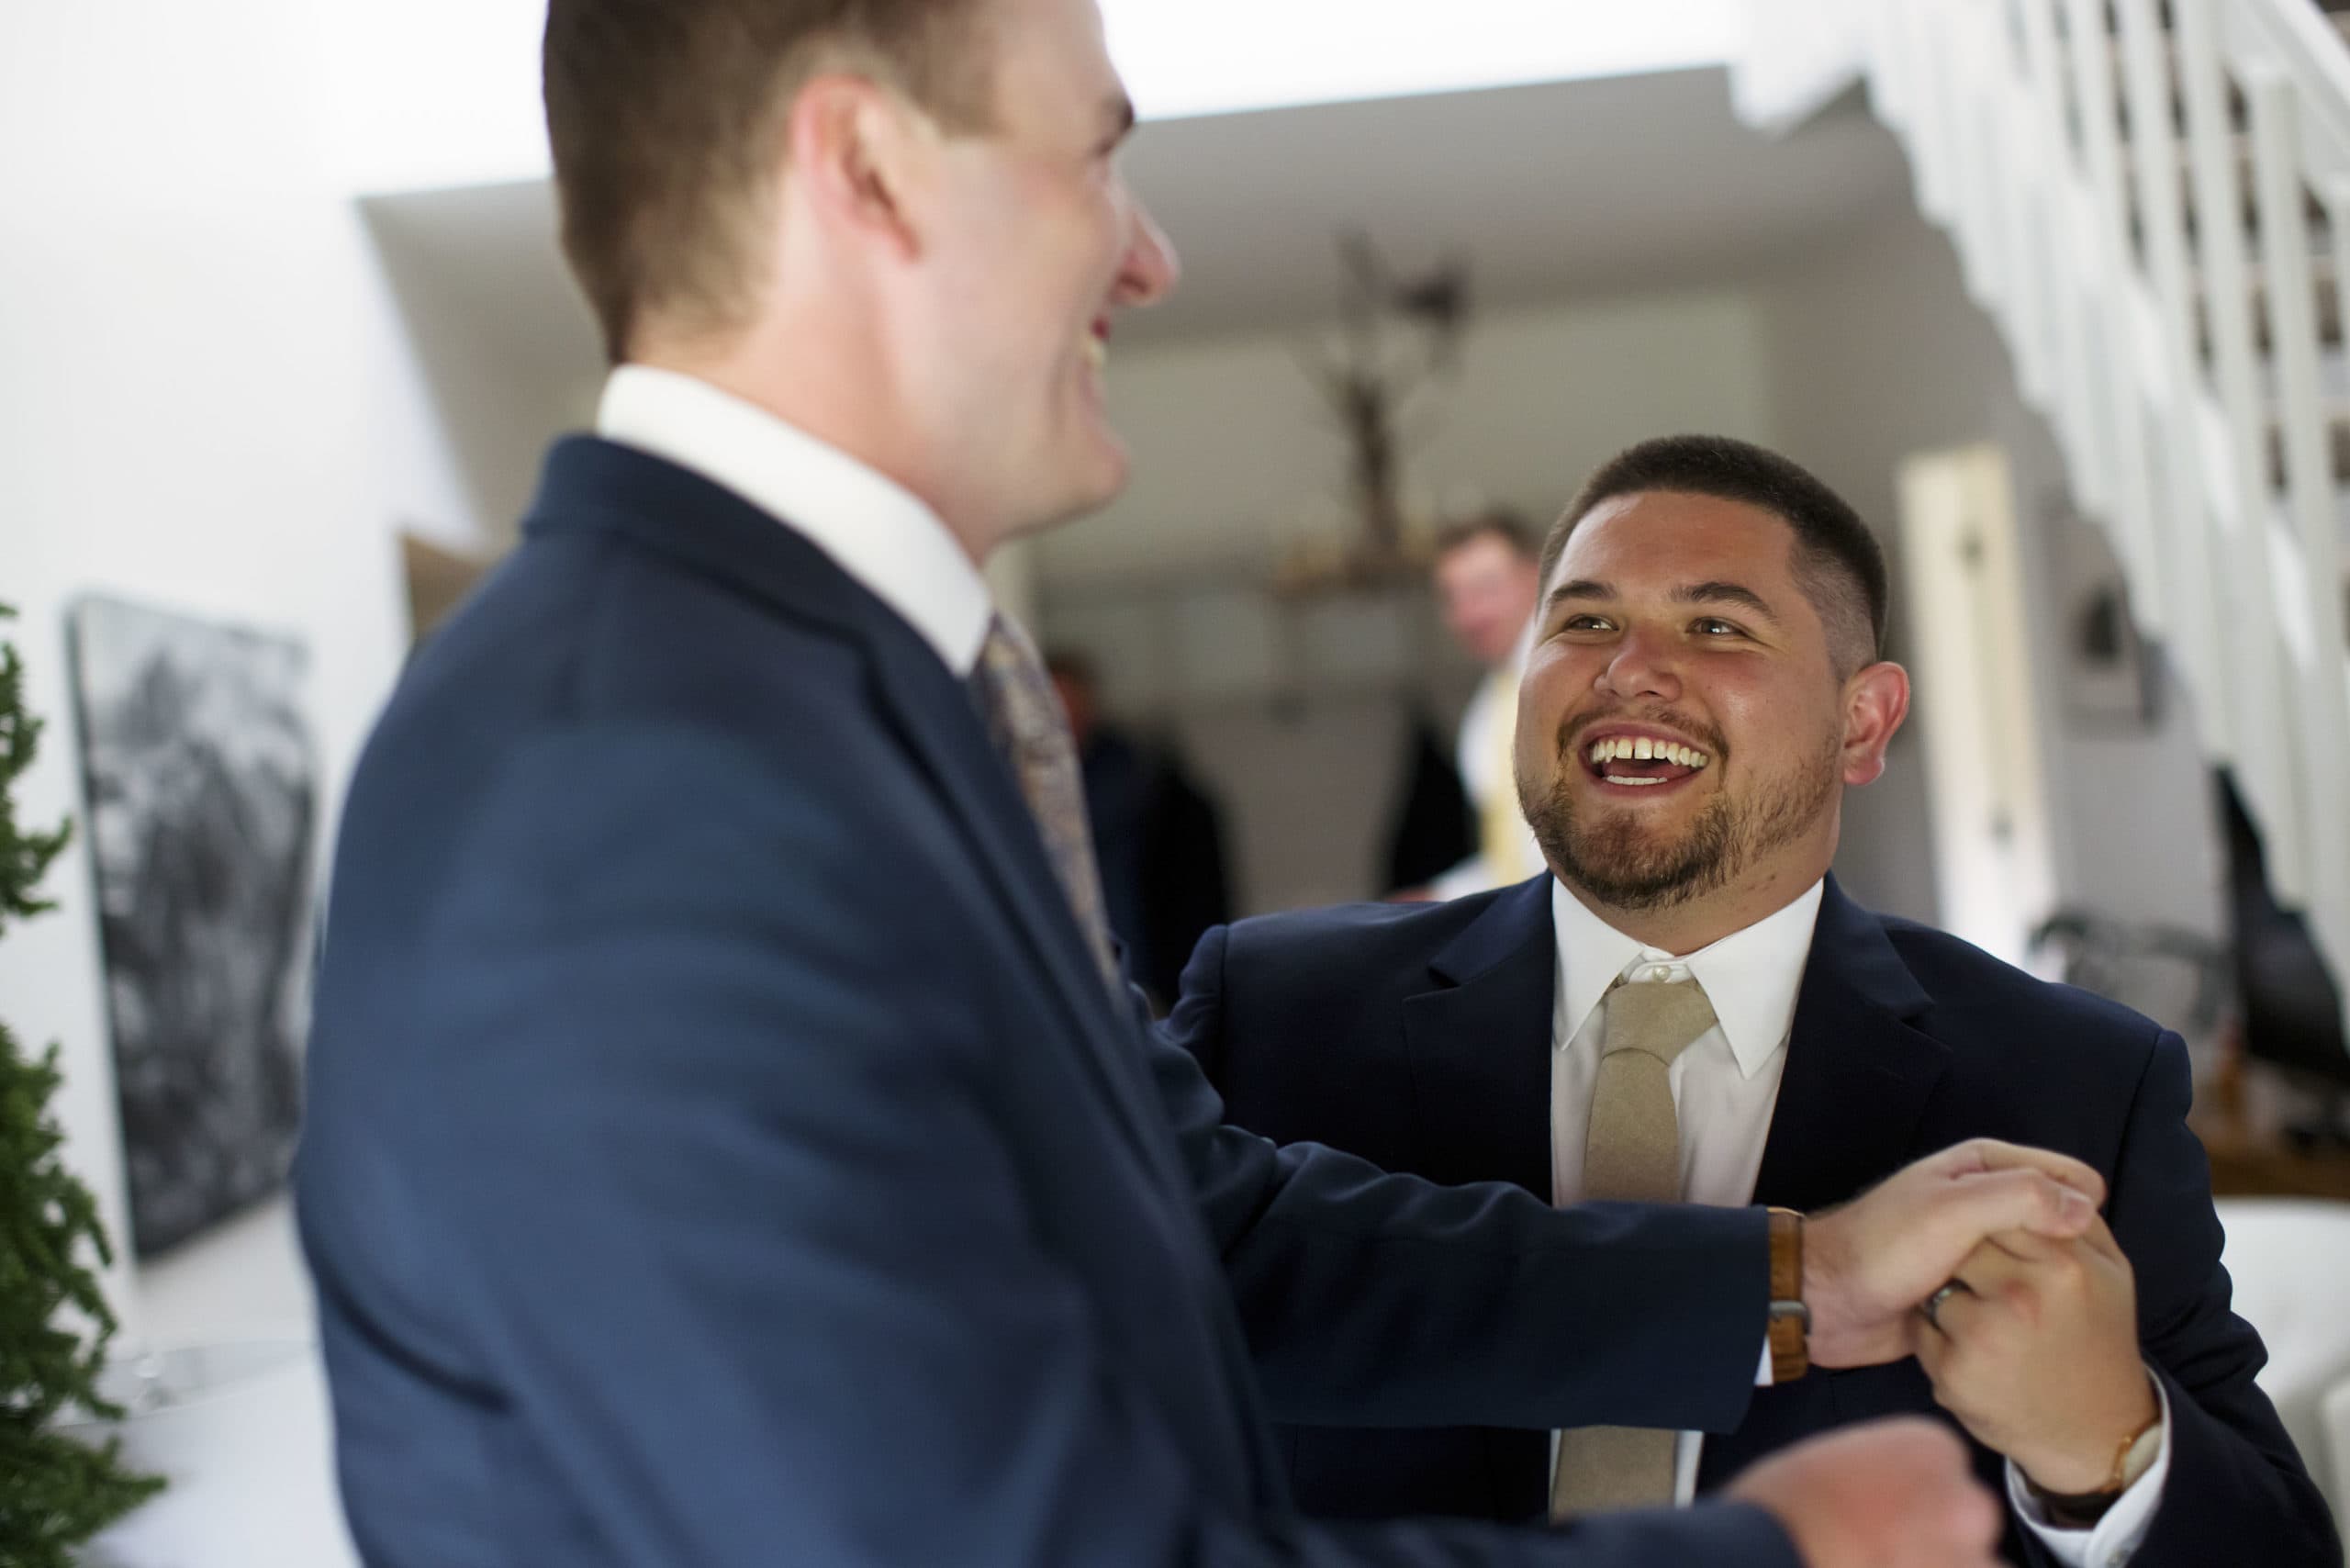 The groom and best man share a laugh while getting ready